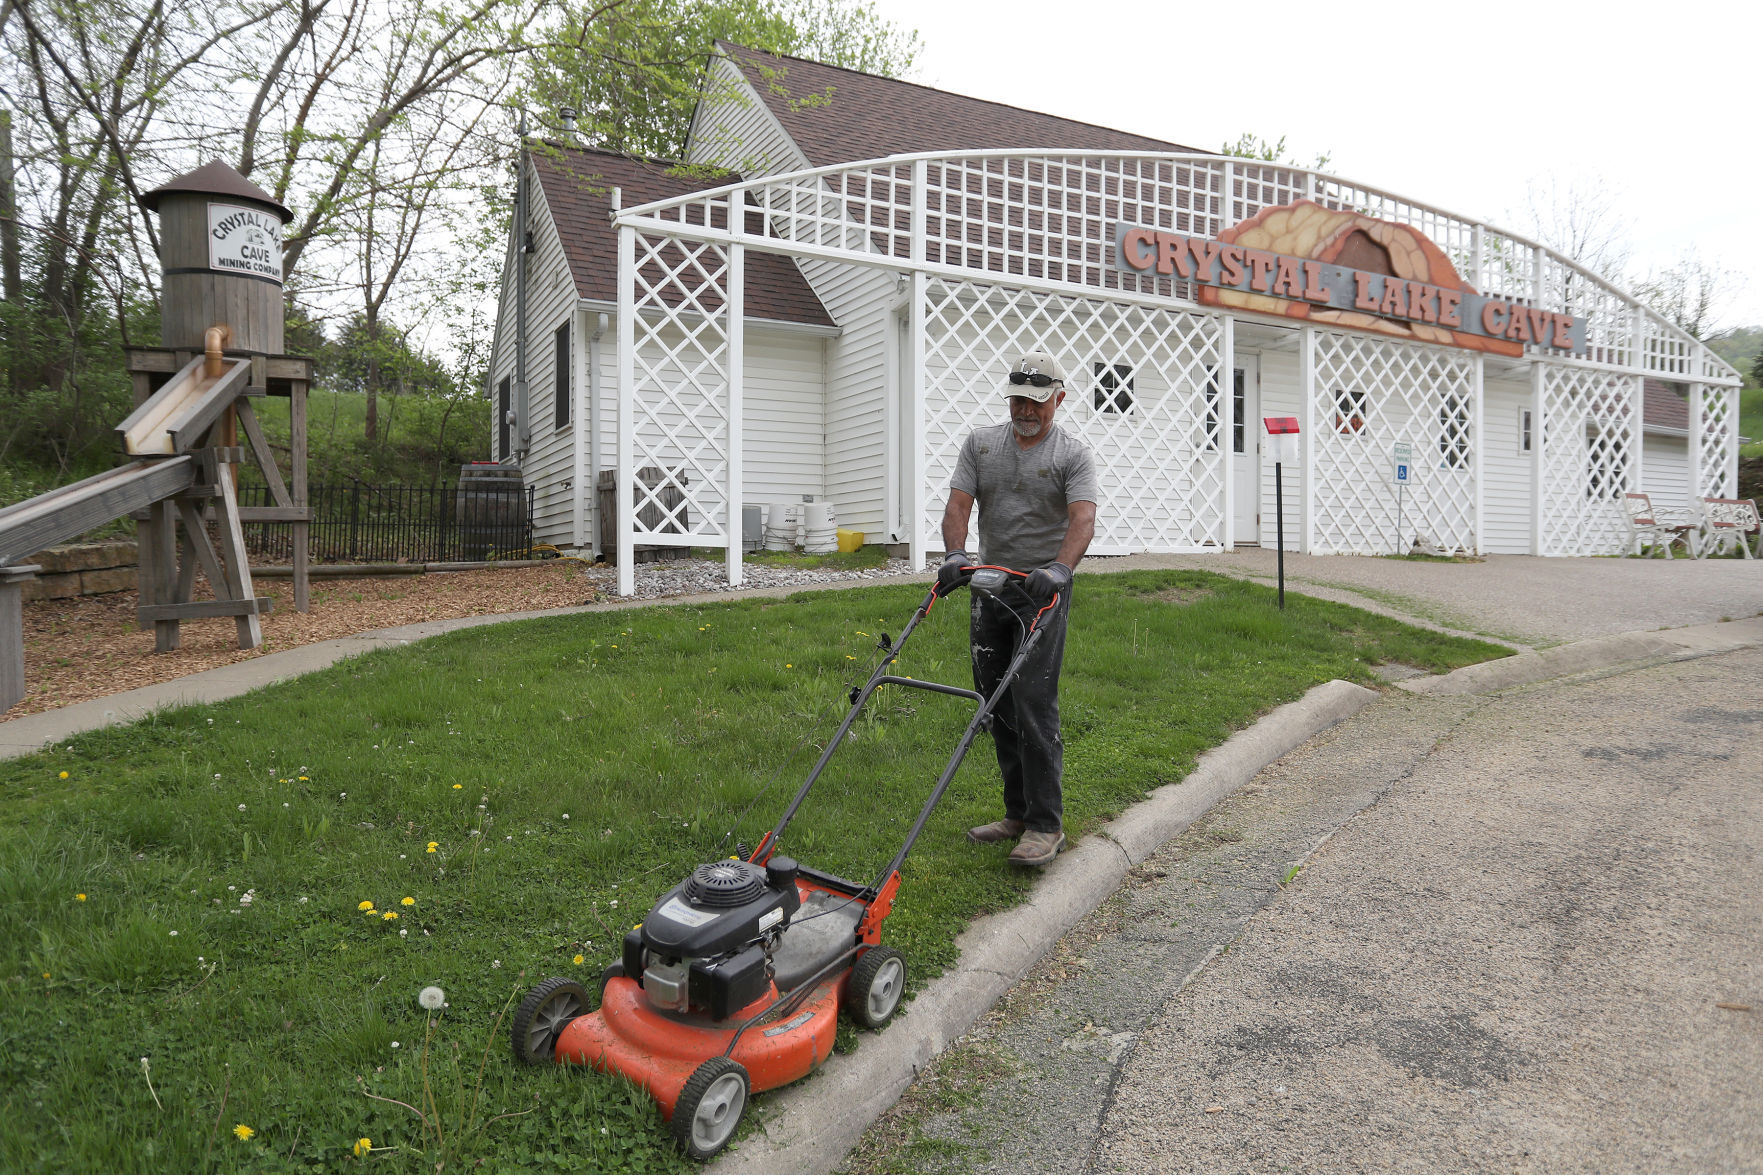 Manager Pablo Ramirez mows the grass at Crystal Lake Cave south of Dubuque on Monday. The business is set to reopen to visitors on weekends starting Saturday, May 8, and every day as of Memorial Day weekend.    PHOTO CREDIT: Stephen Gassman